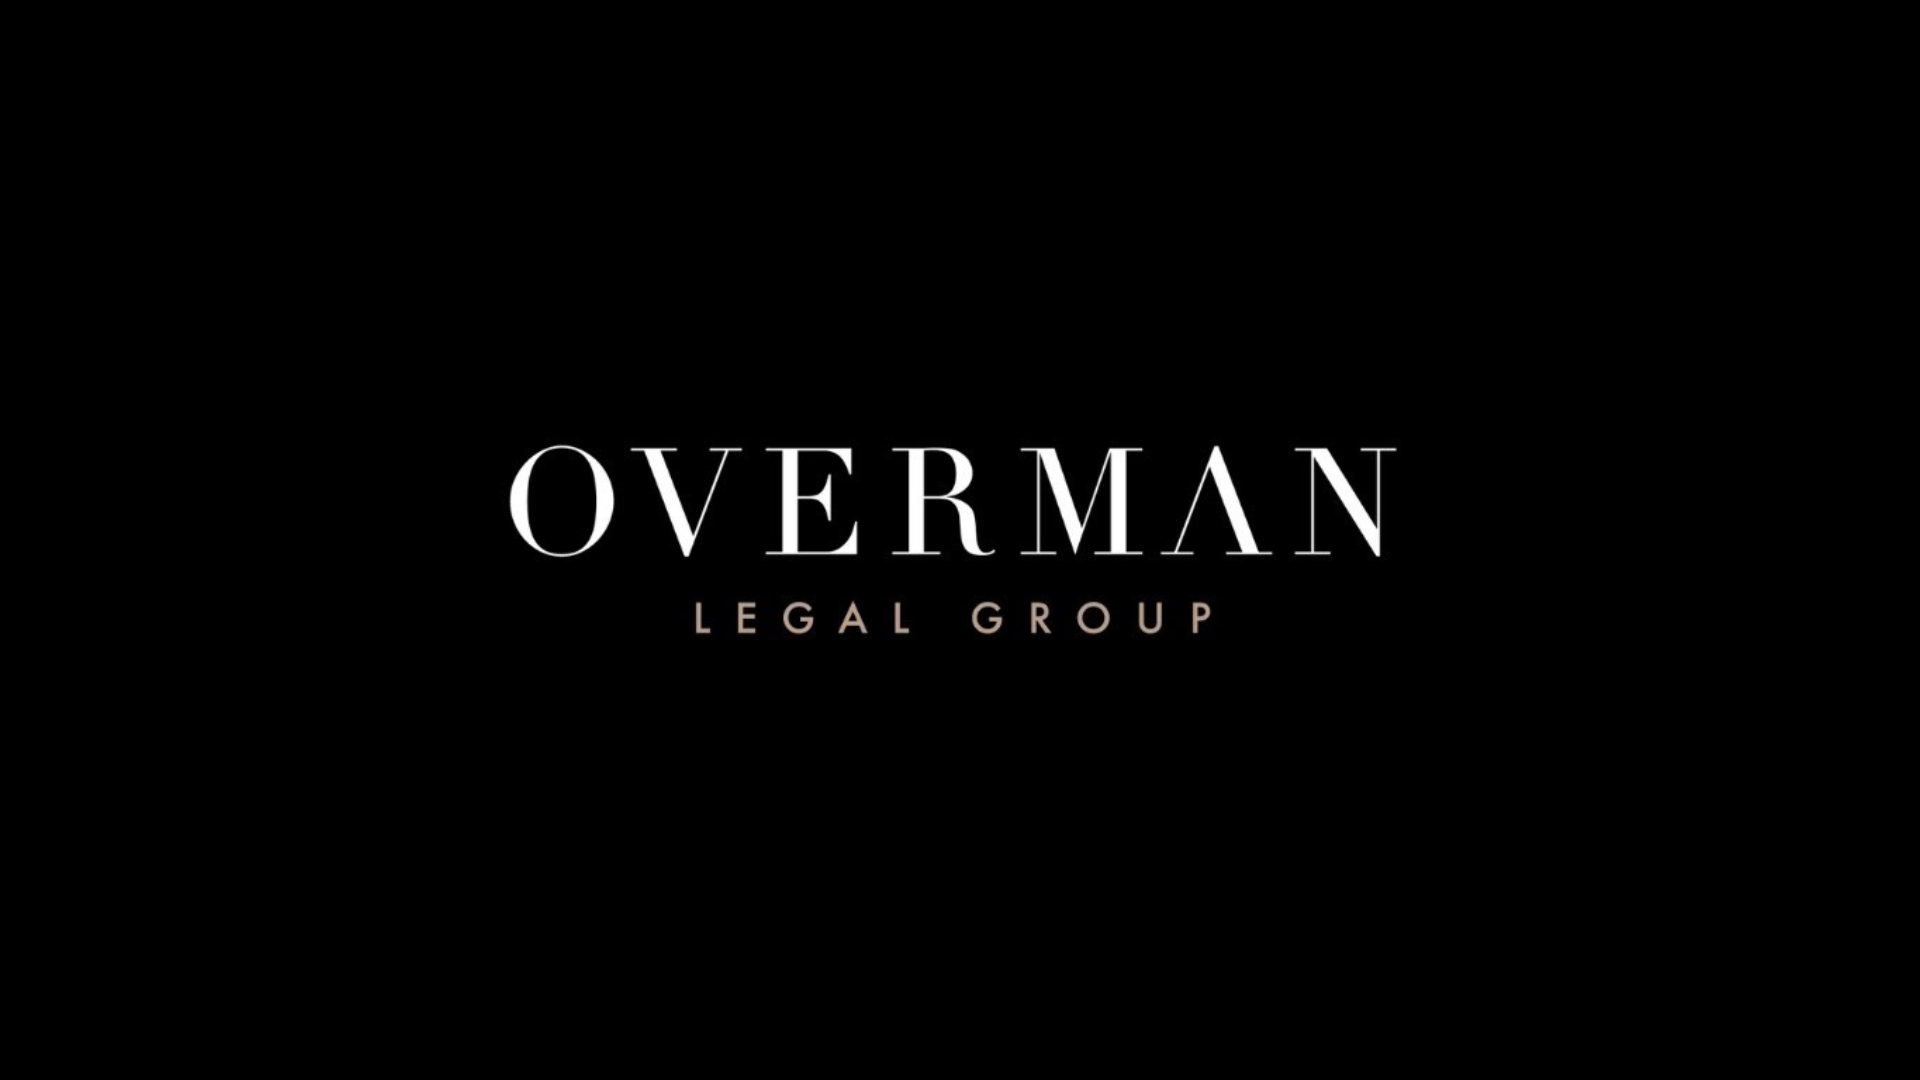 Why Choose Overman?